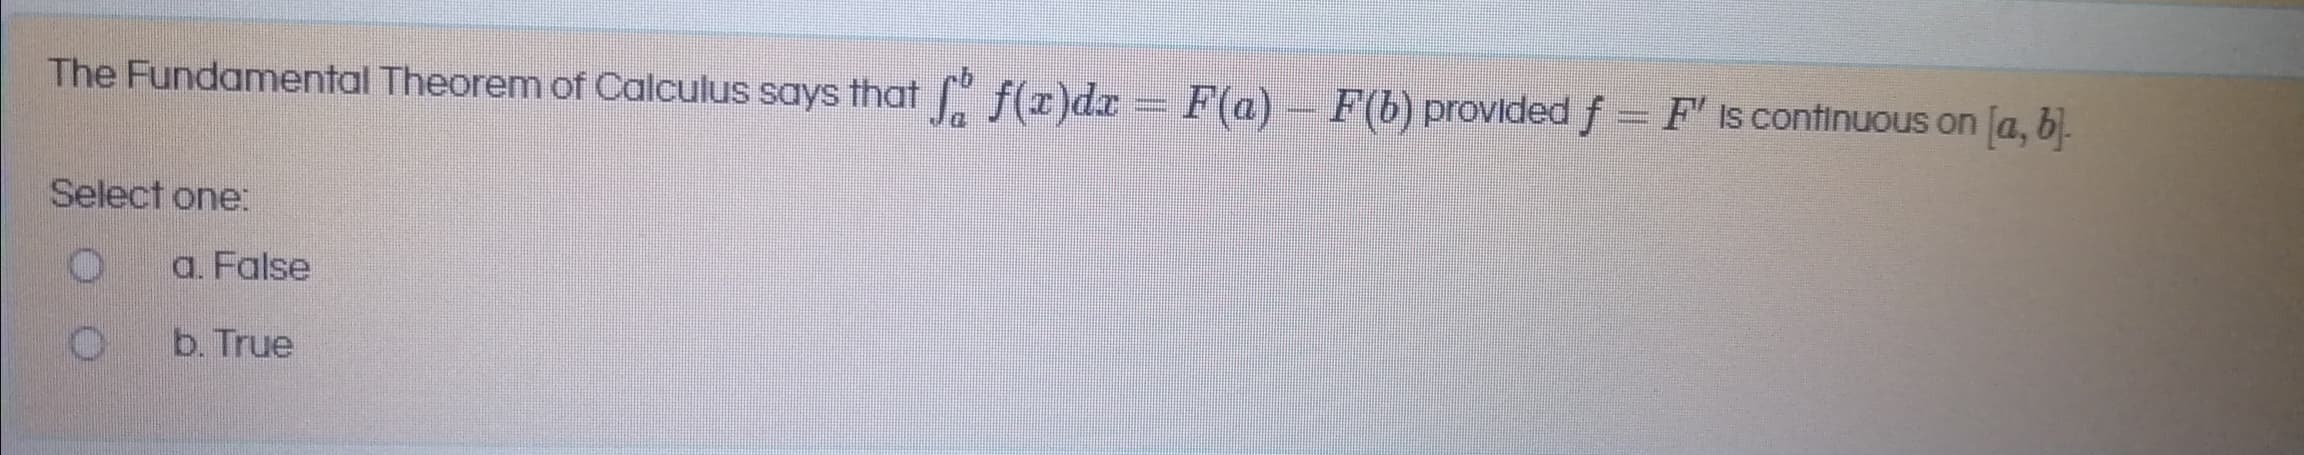 The Fundamental Theorem of Calculus says that f(x)da = F(a)
– F(b) provided f = F' Is continuous on [a, b).
Select one:
a. False
b. True
